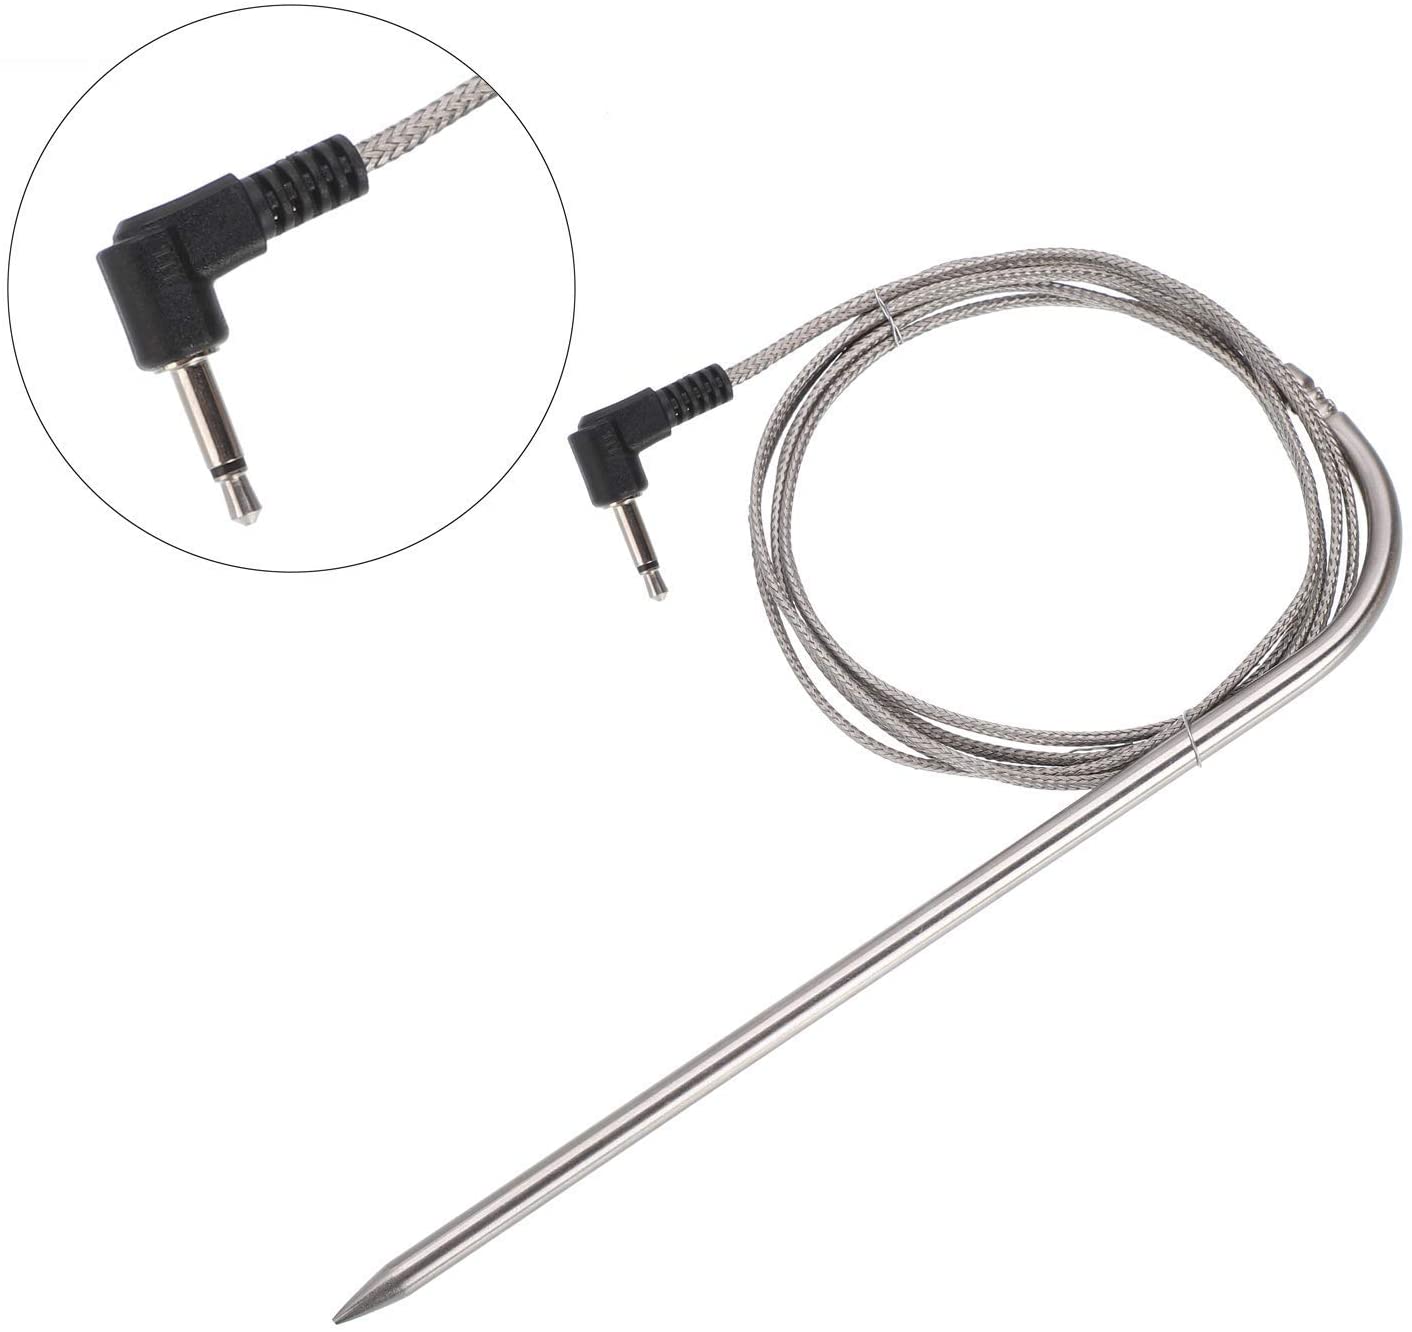 2 Pack Replacement Meat Probe for Traeger Pellet Grill Smokers Parts, 3.5mm  Plug